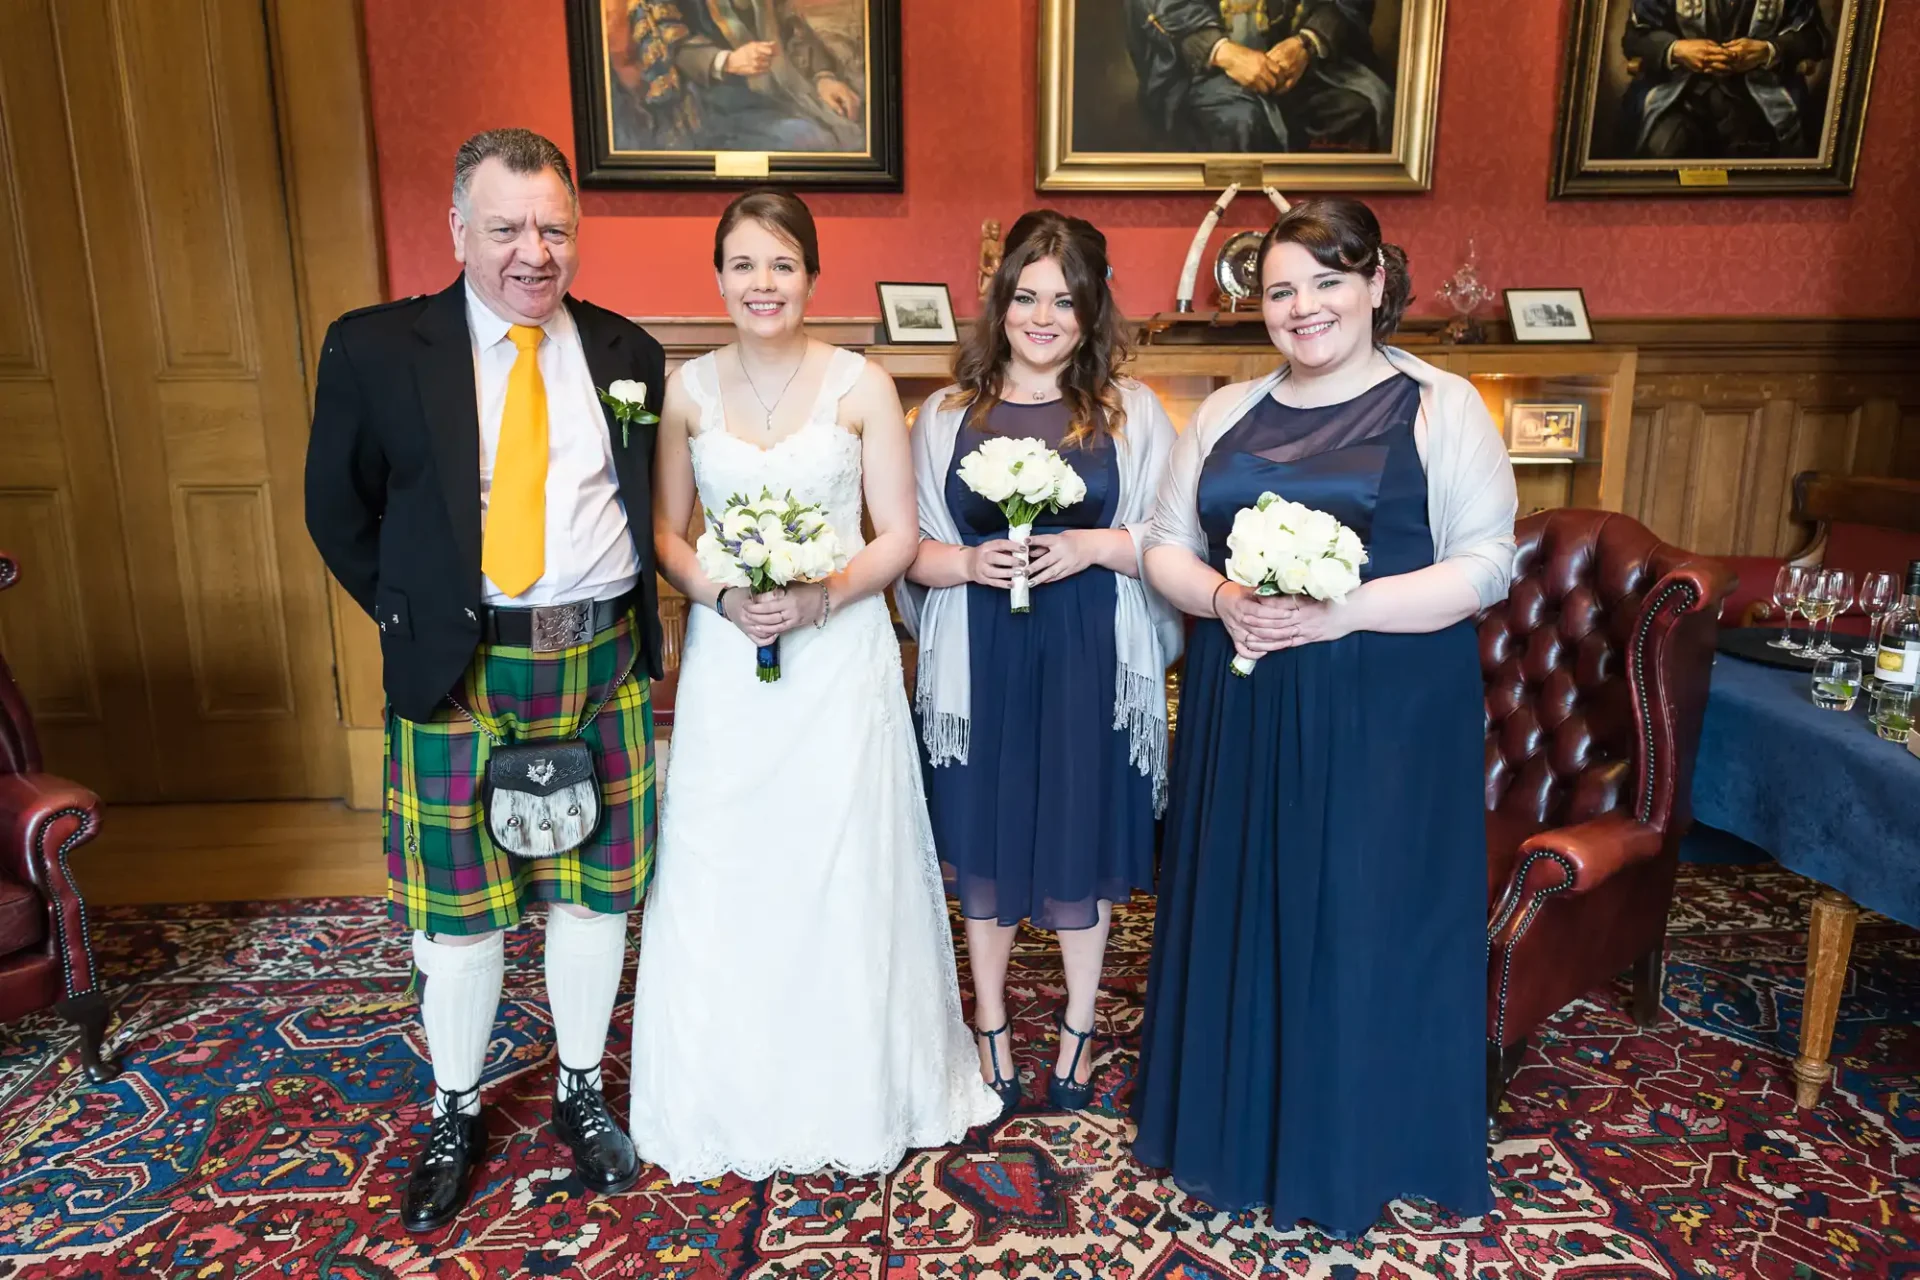 A bride and groom flanked by two bridesmaids holding bouquets in a room with dark wood paneling and paintings. the groom wears a traditional kilt.